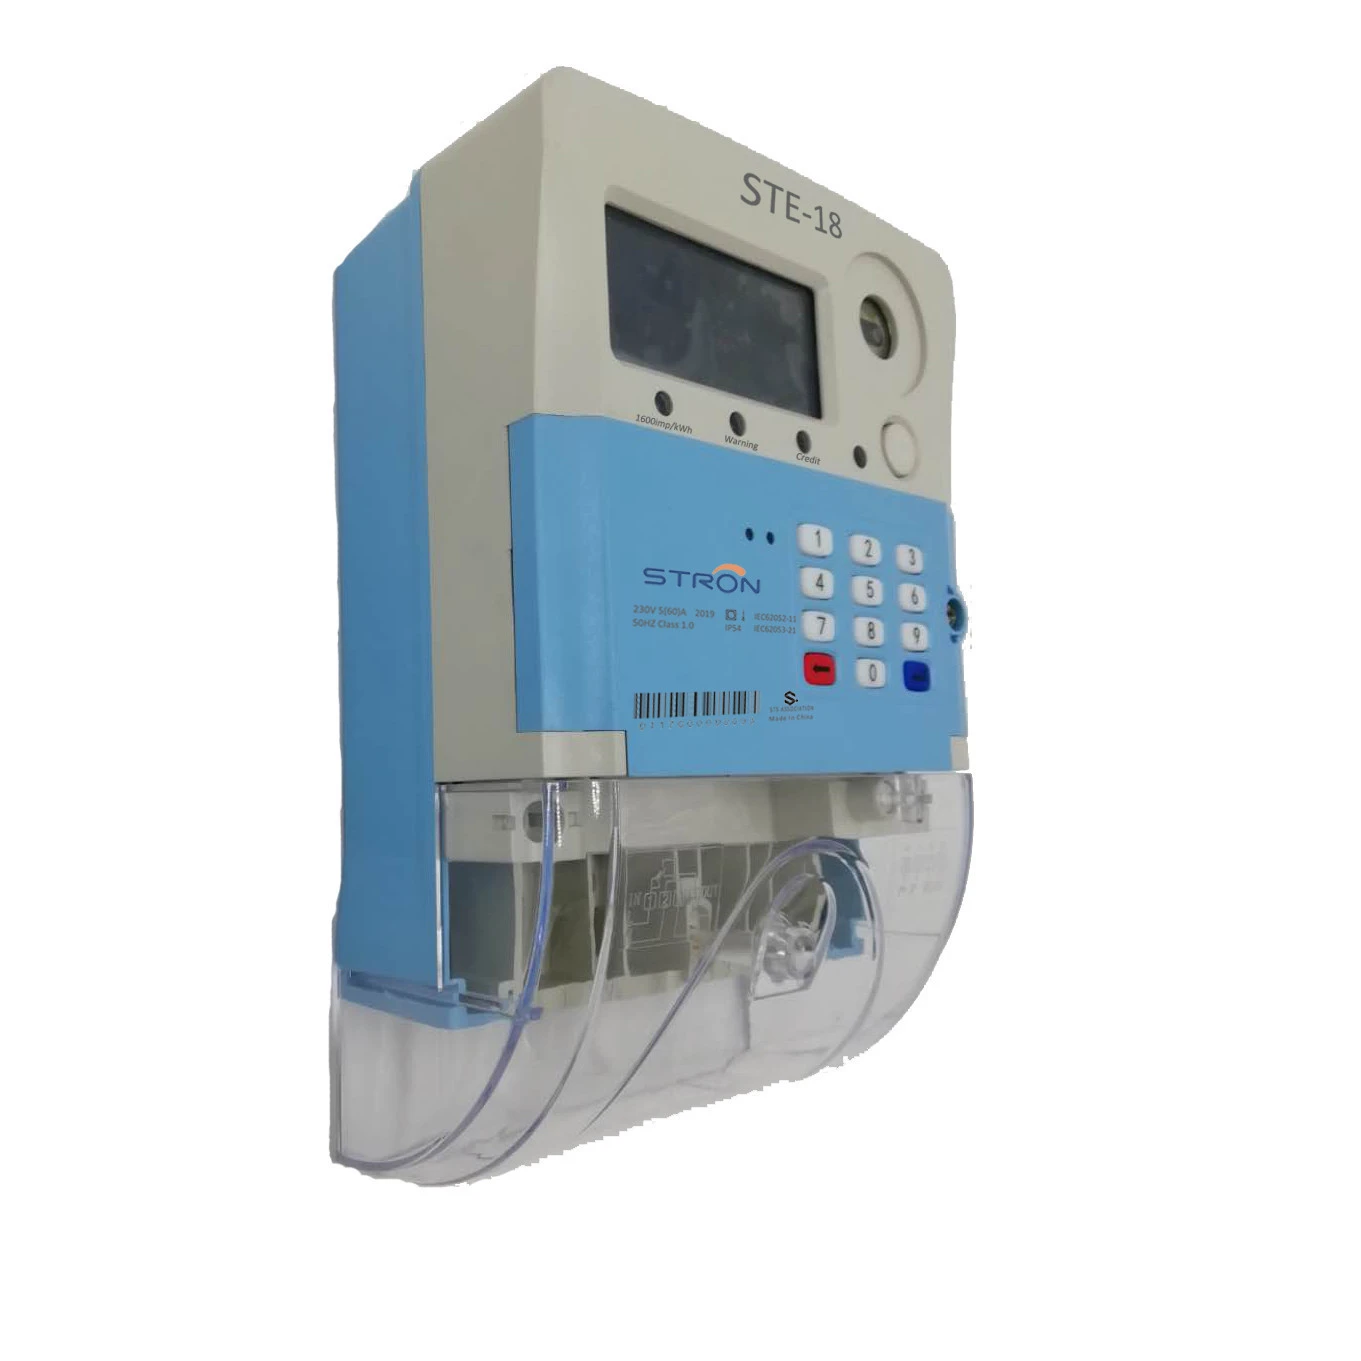 STS Split Keypad Single Phase Digital TOU Tariff and Power-limited functions Electricity/Energy Meter with PLC module and CIU